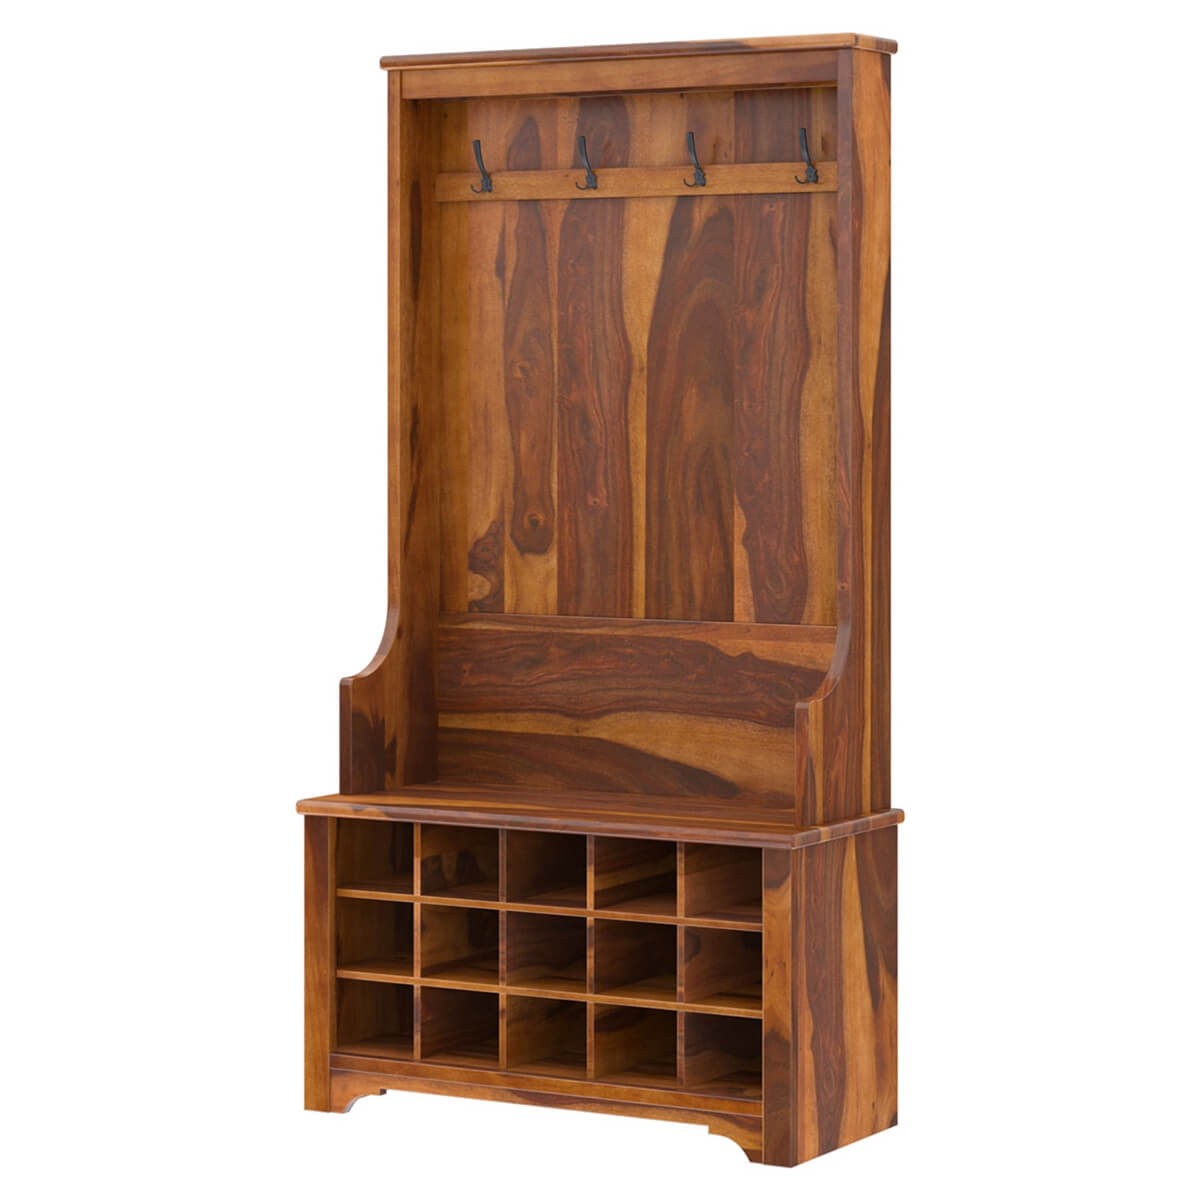 Cornish rustic solid wood entryway hall tree with shoe storage